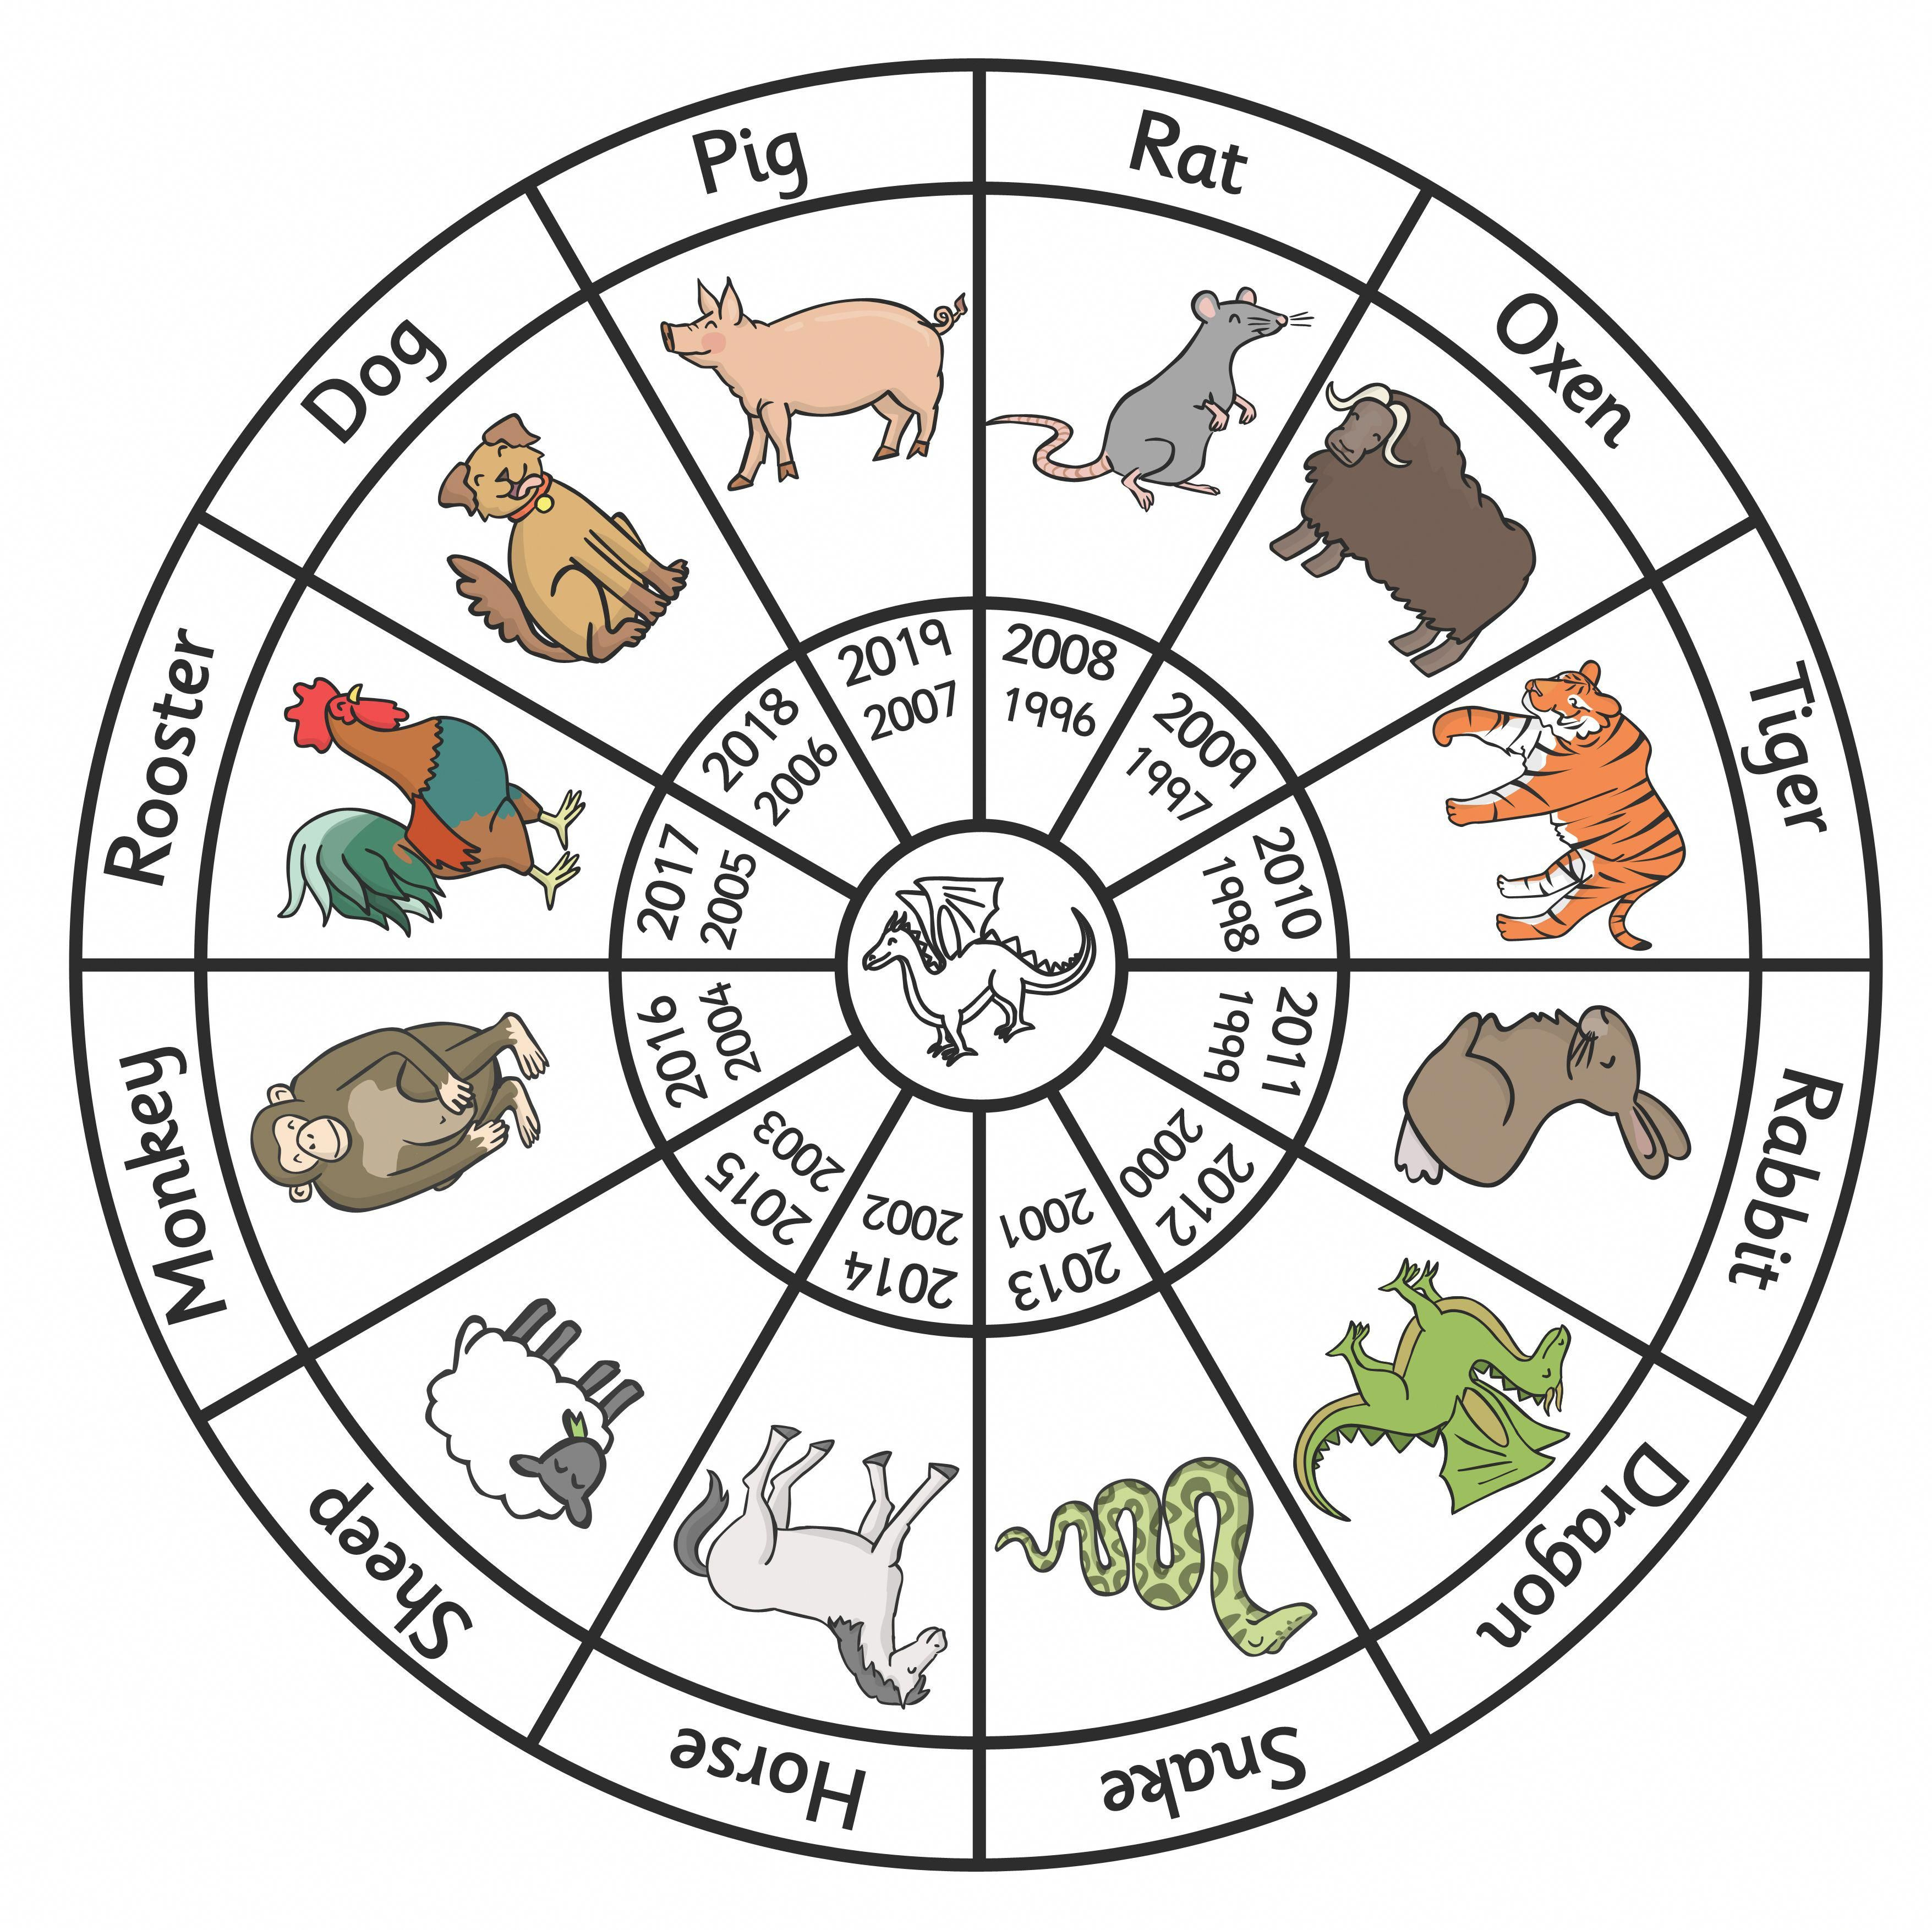 Chinese Zodiac Wheel - Pop Over To Our Site At Www.twinkl.co.uk And - Free Printable Chinese Zodiac Wheel